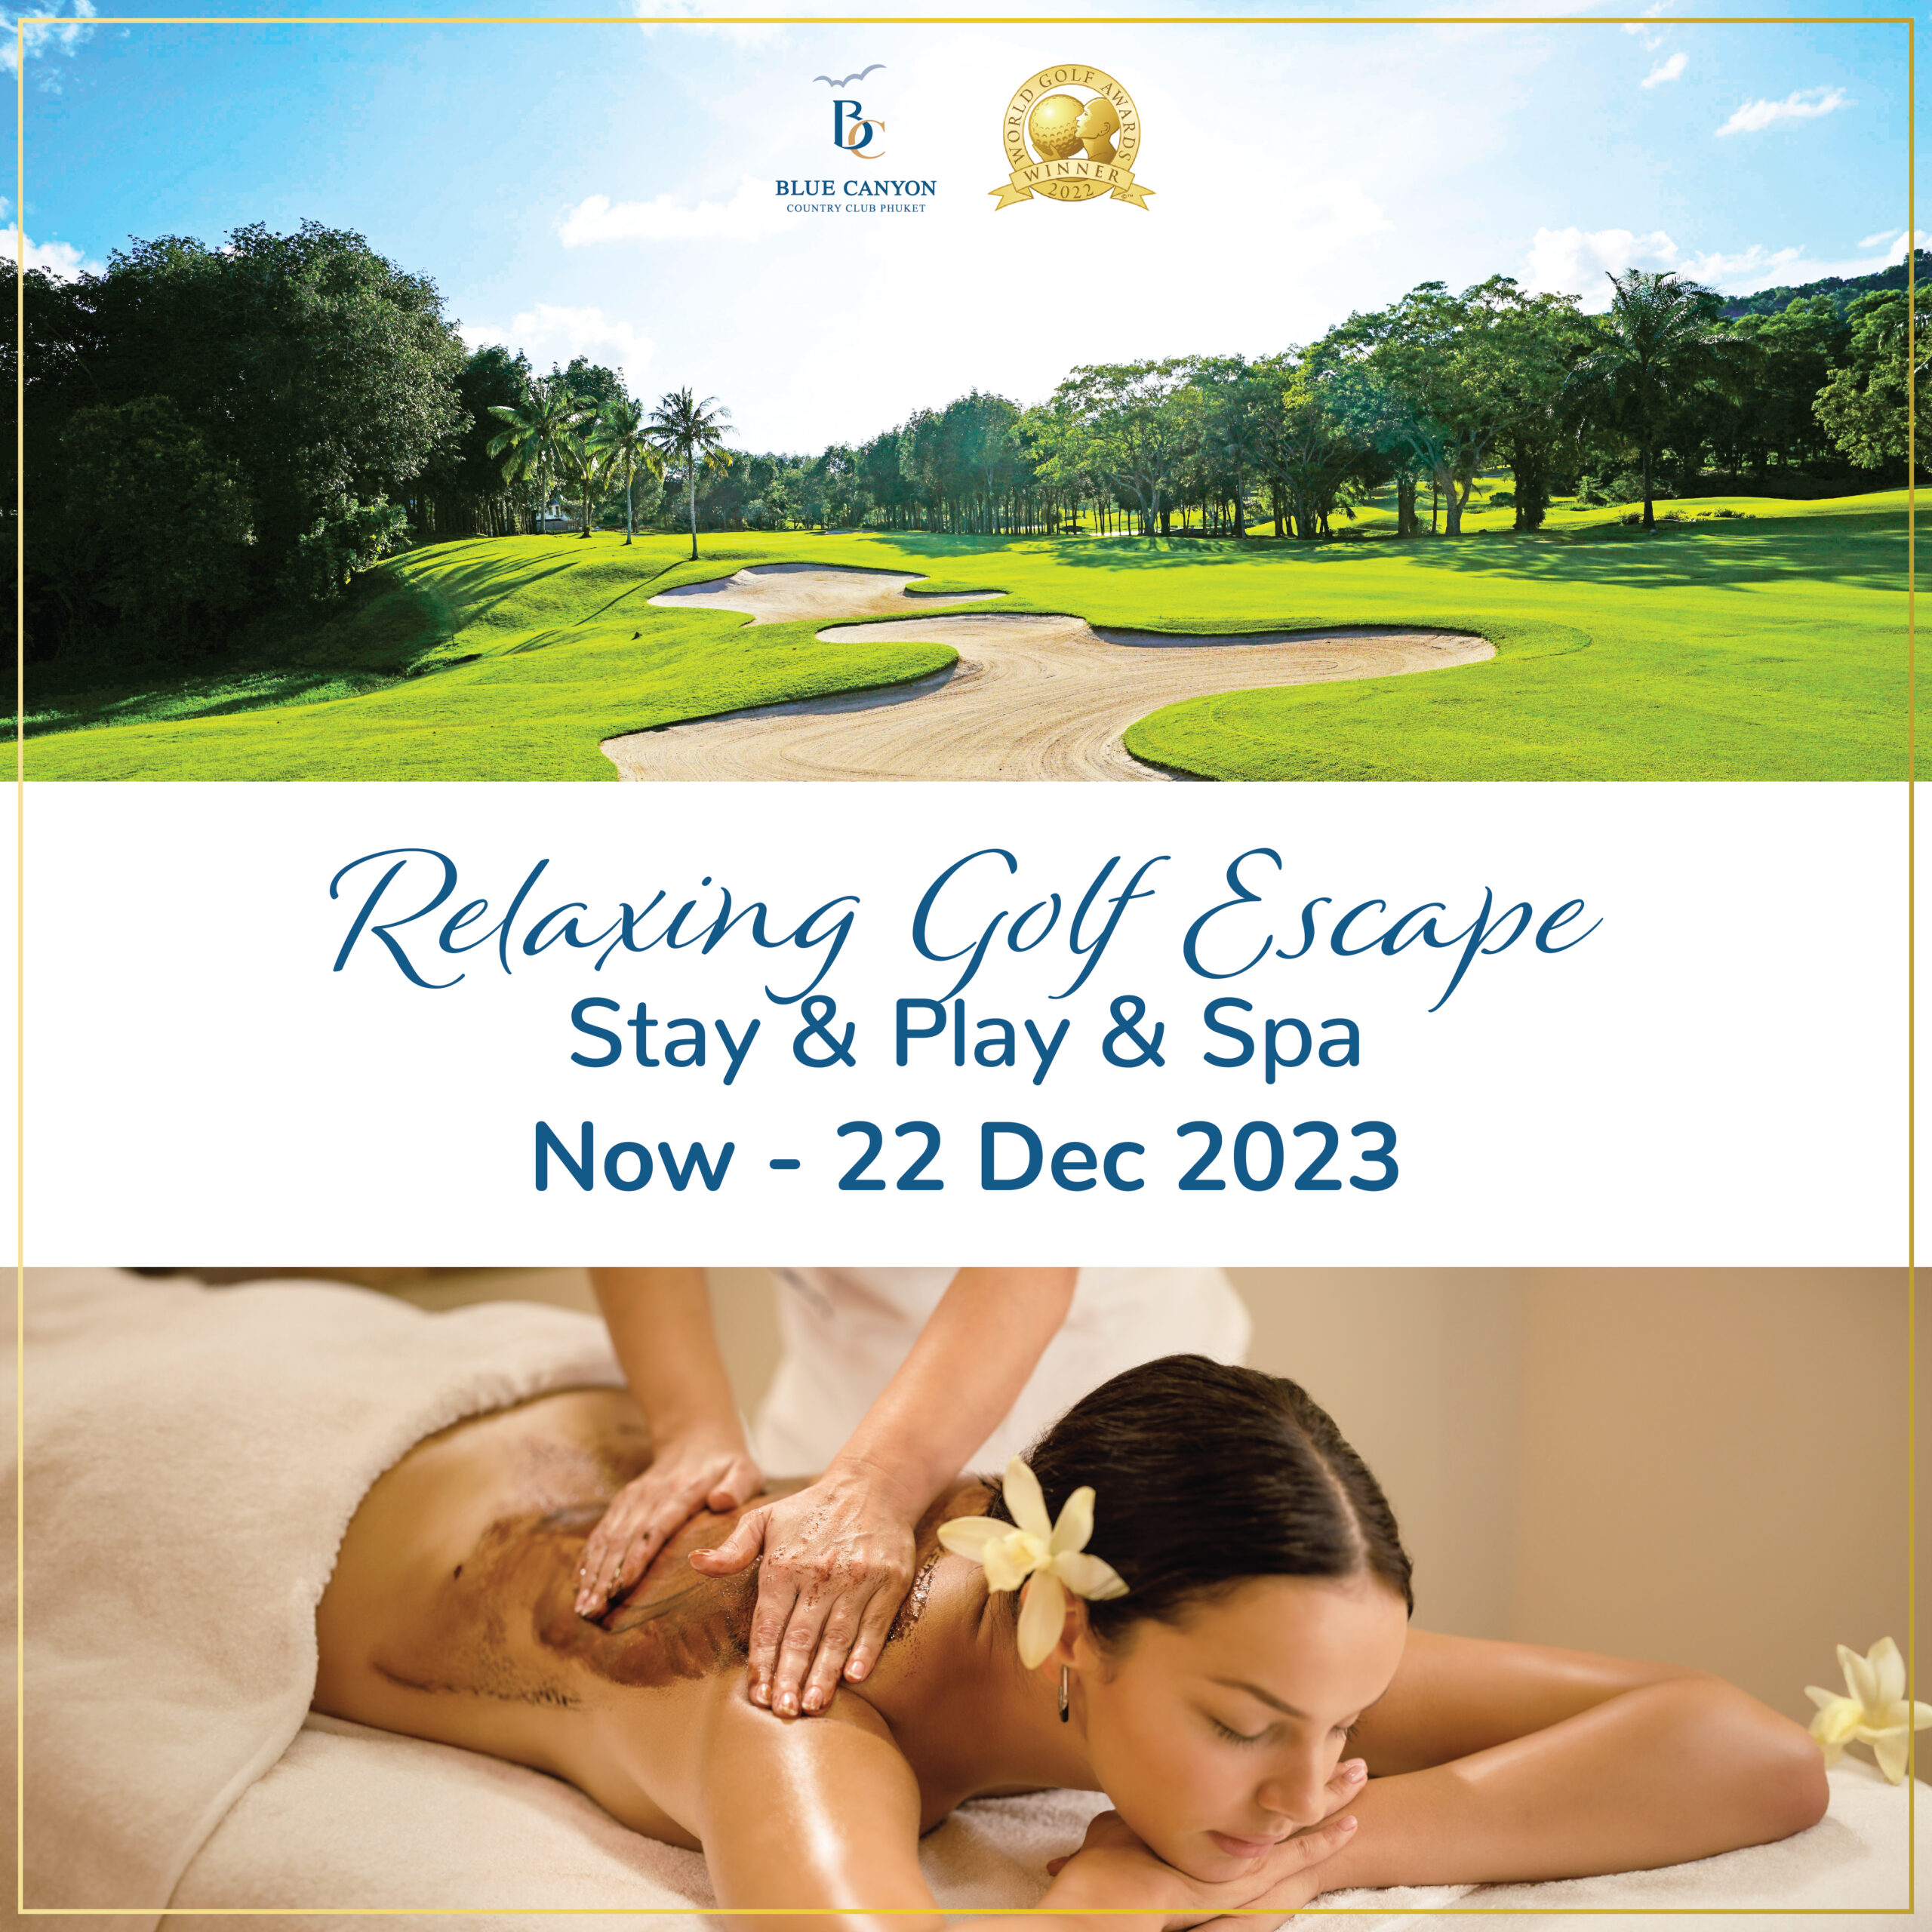 Relaxing Golf Escape - Stay & Play & Spa